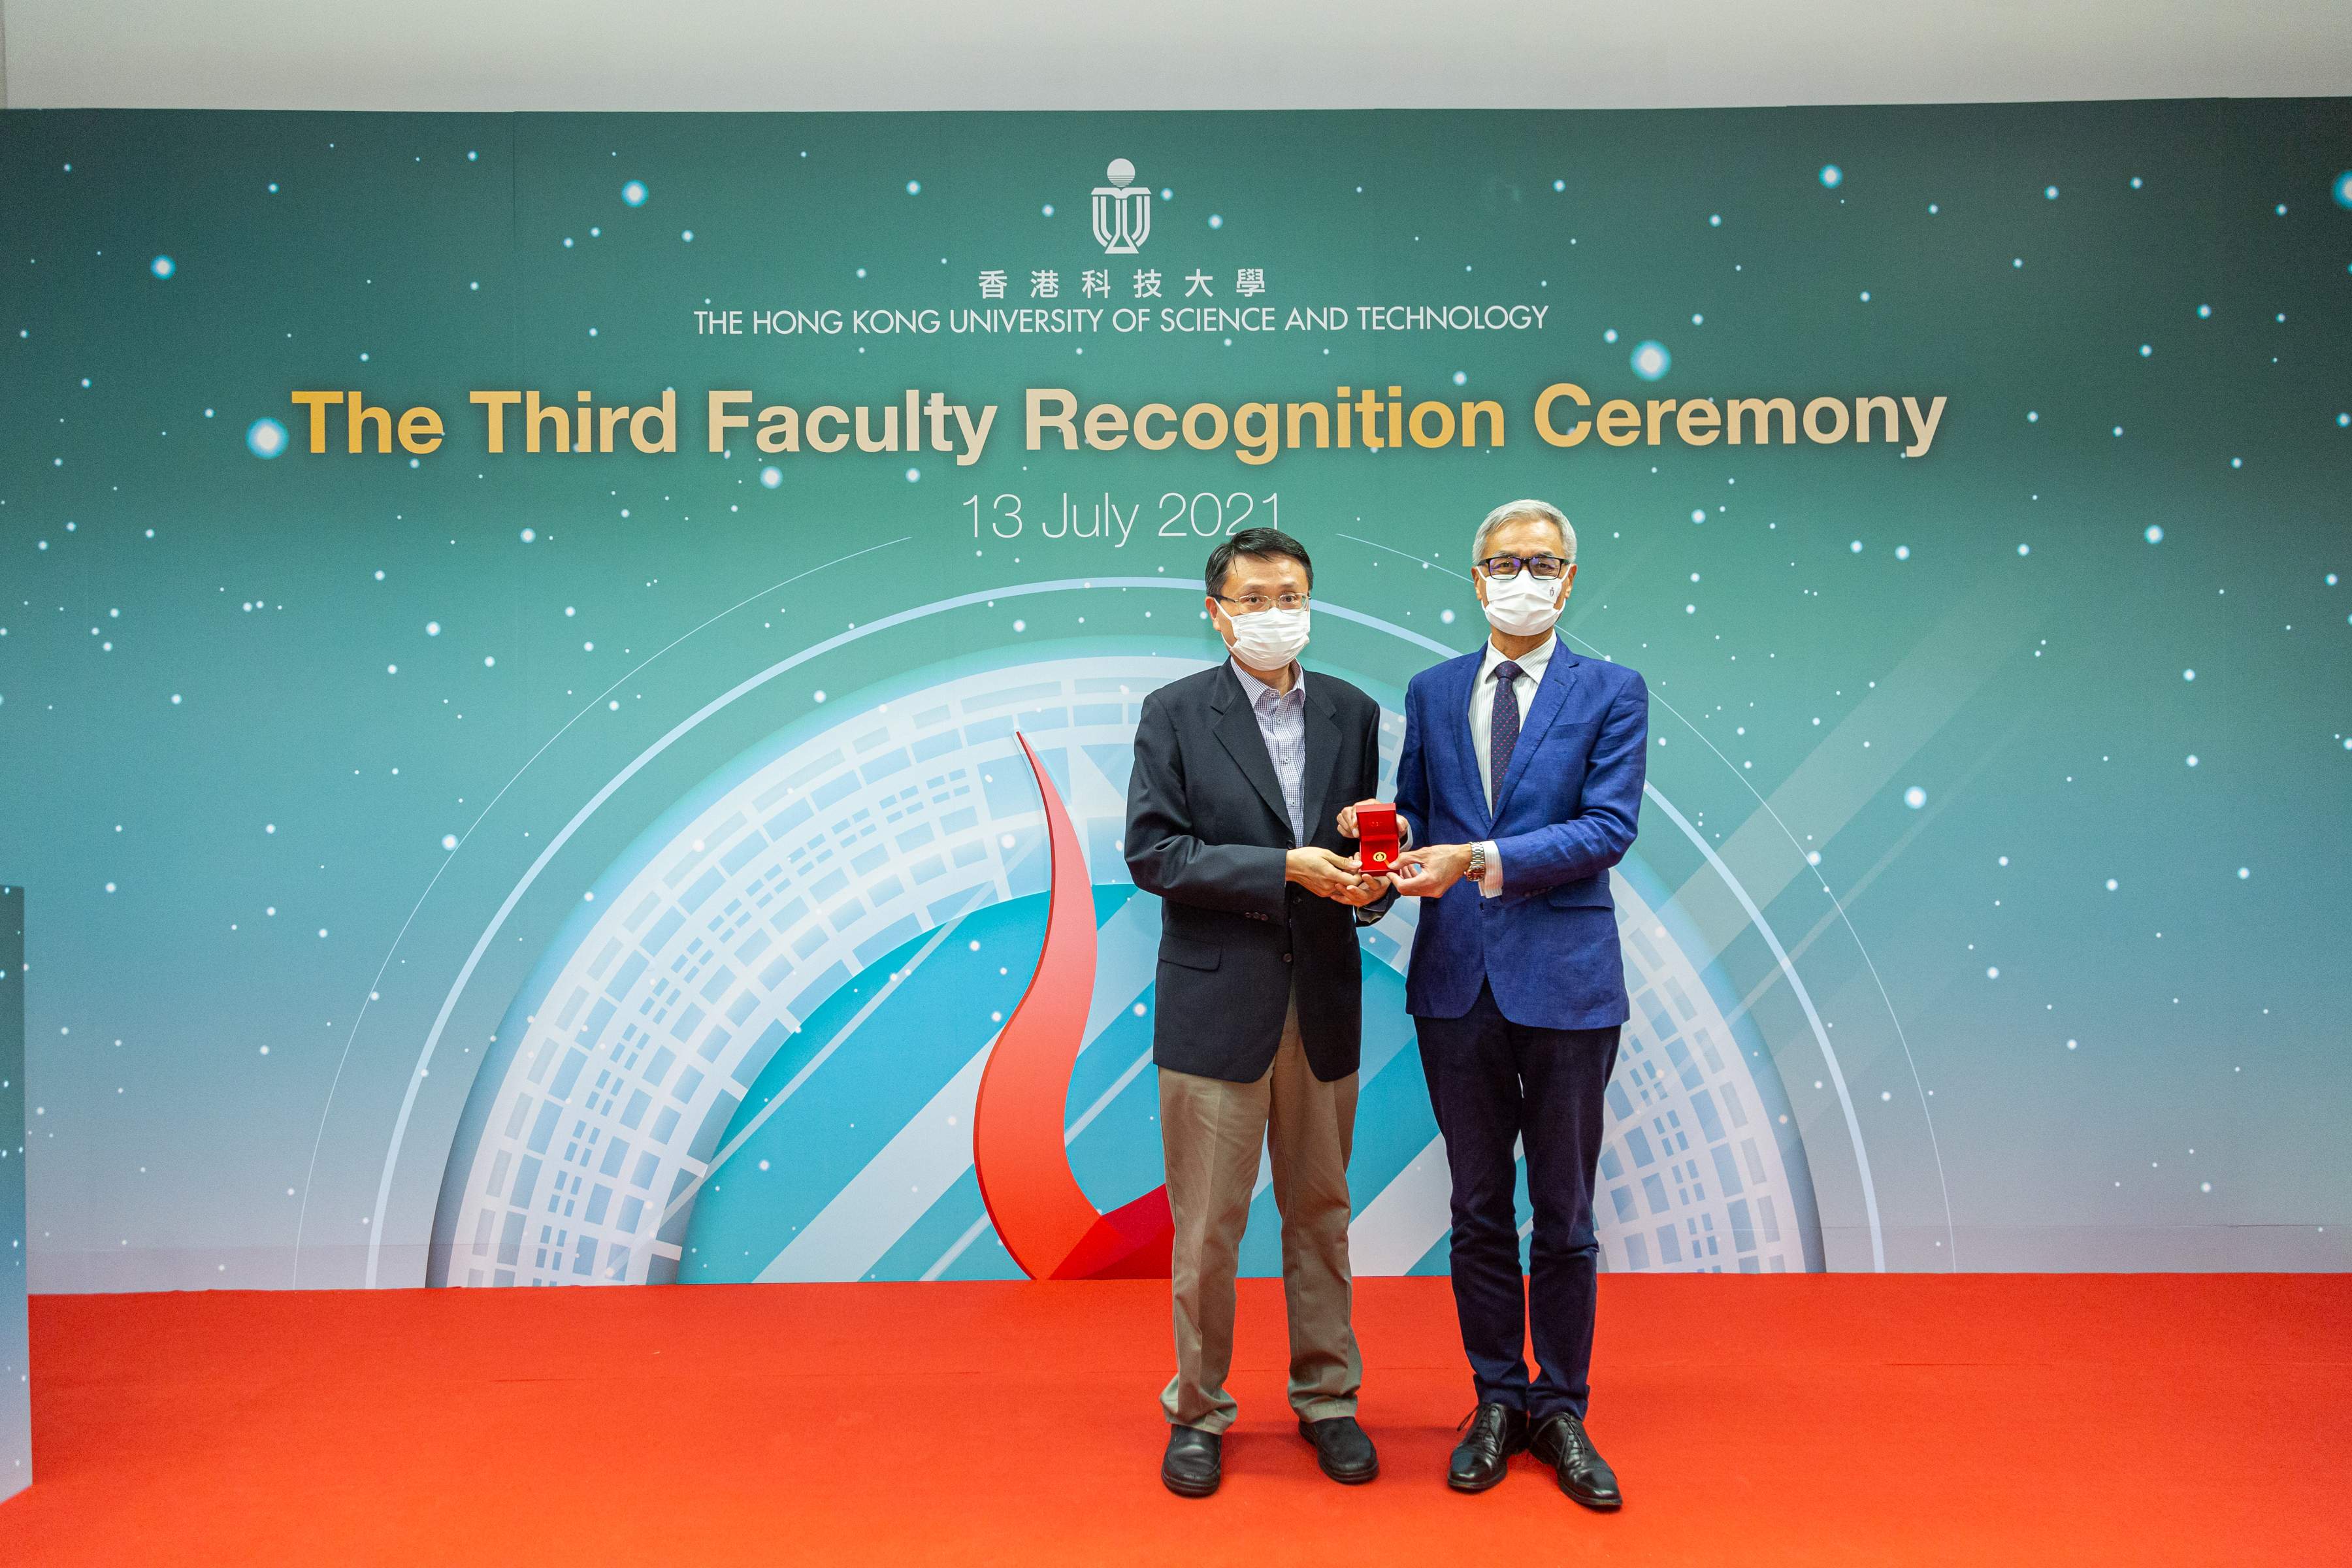 Faculty Recognition Ceremony 2021